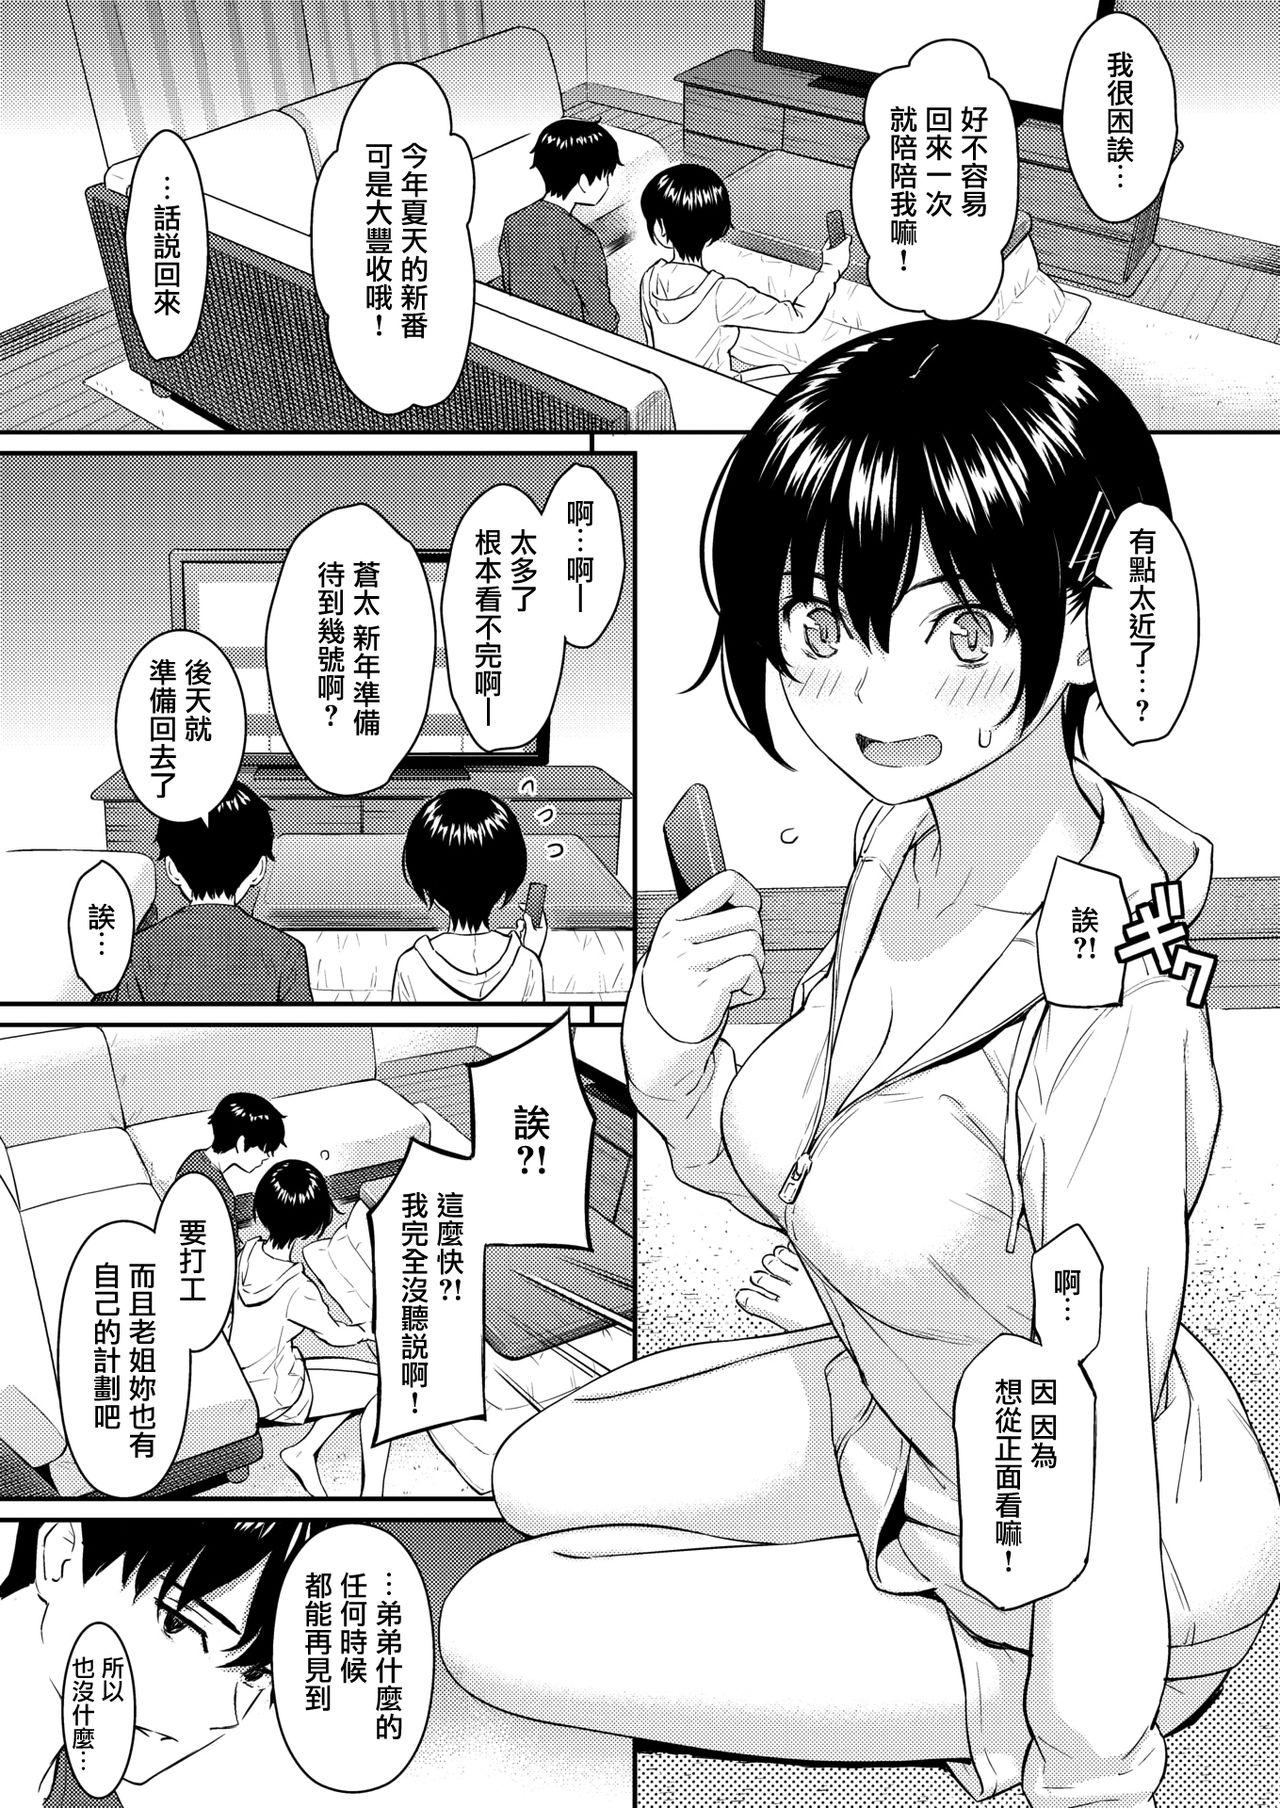 Anime Bye-Bye Sister Officesex - Page 7